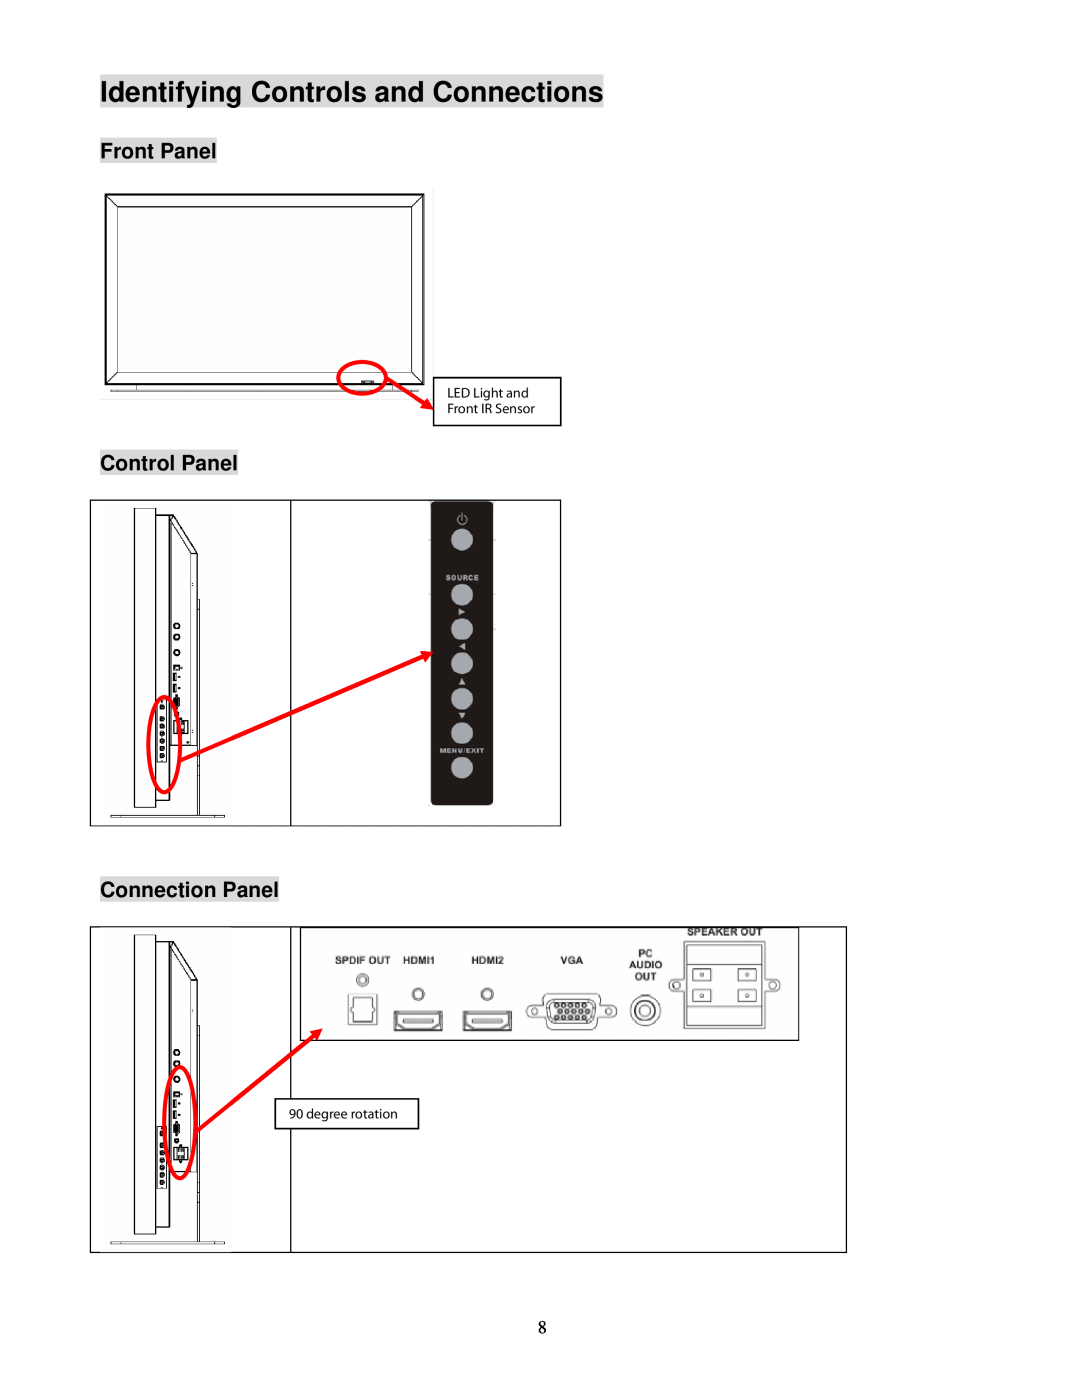 Planar pd 370, 520, 470 Identifying Controls and Connections, Front Panel, Control Panel Connection Panel, degree rotation 